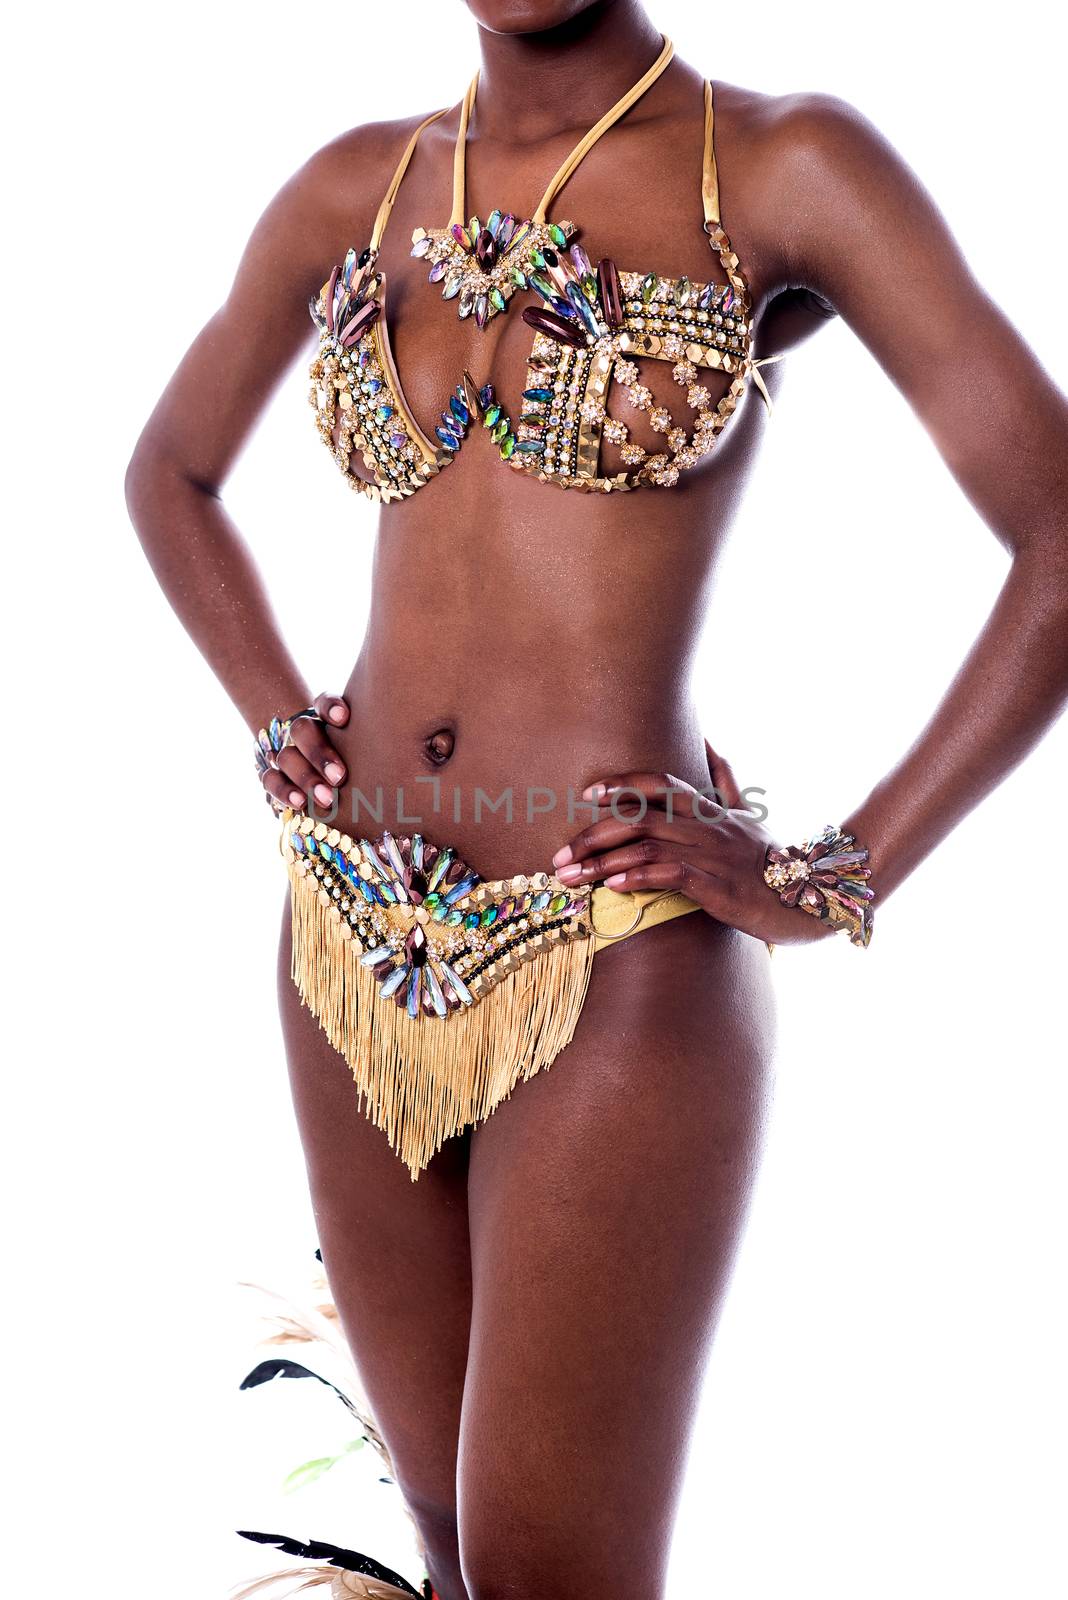 Mid section of samba dancer. by stockyimages